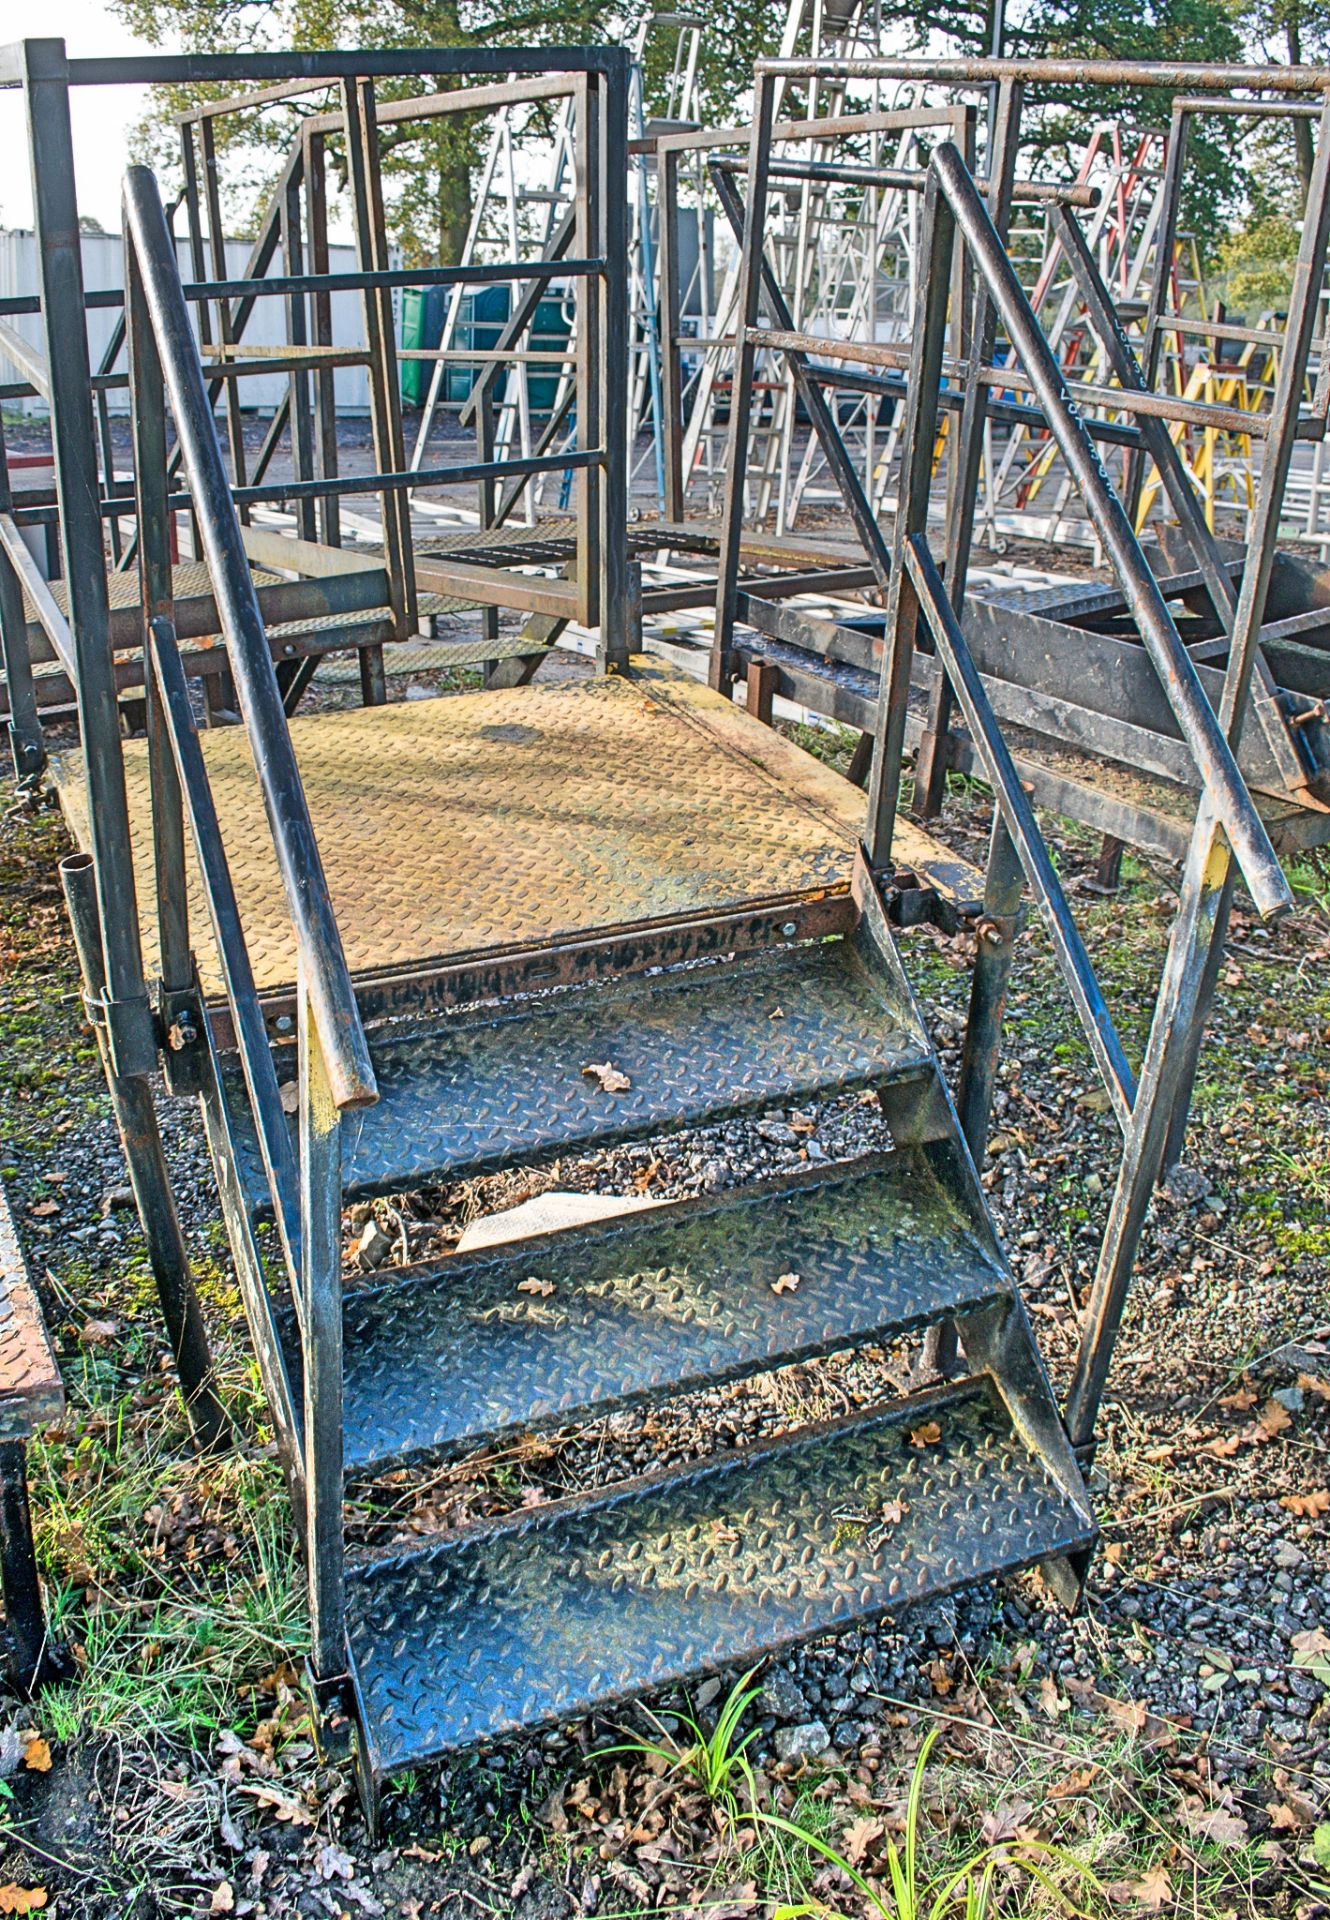 Steel staircase